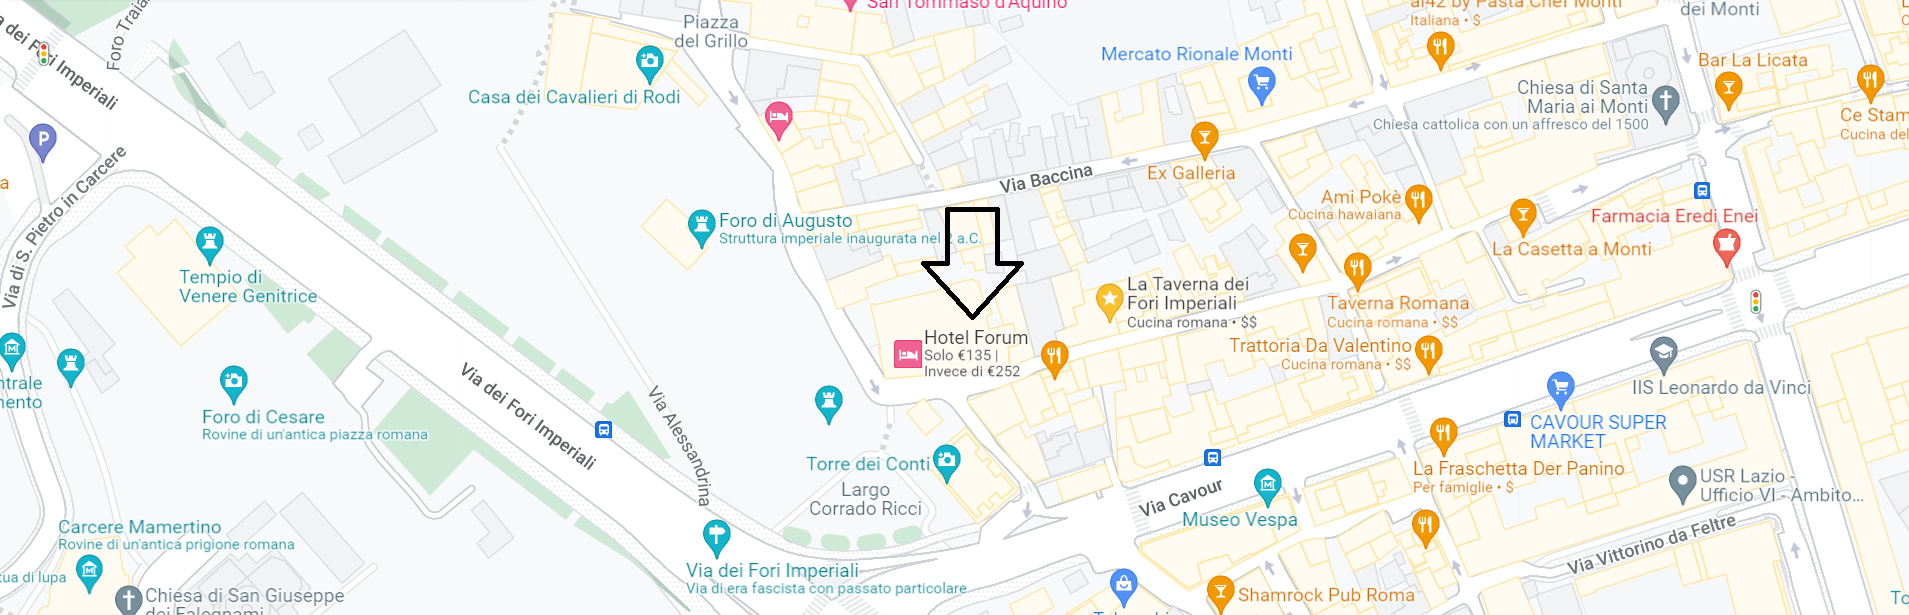 Map to Hotel Forum1